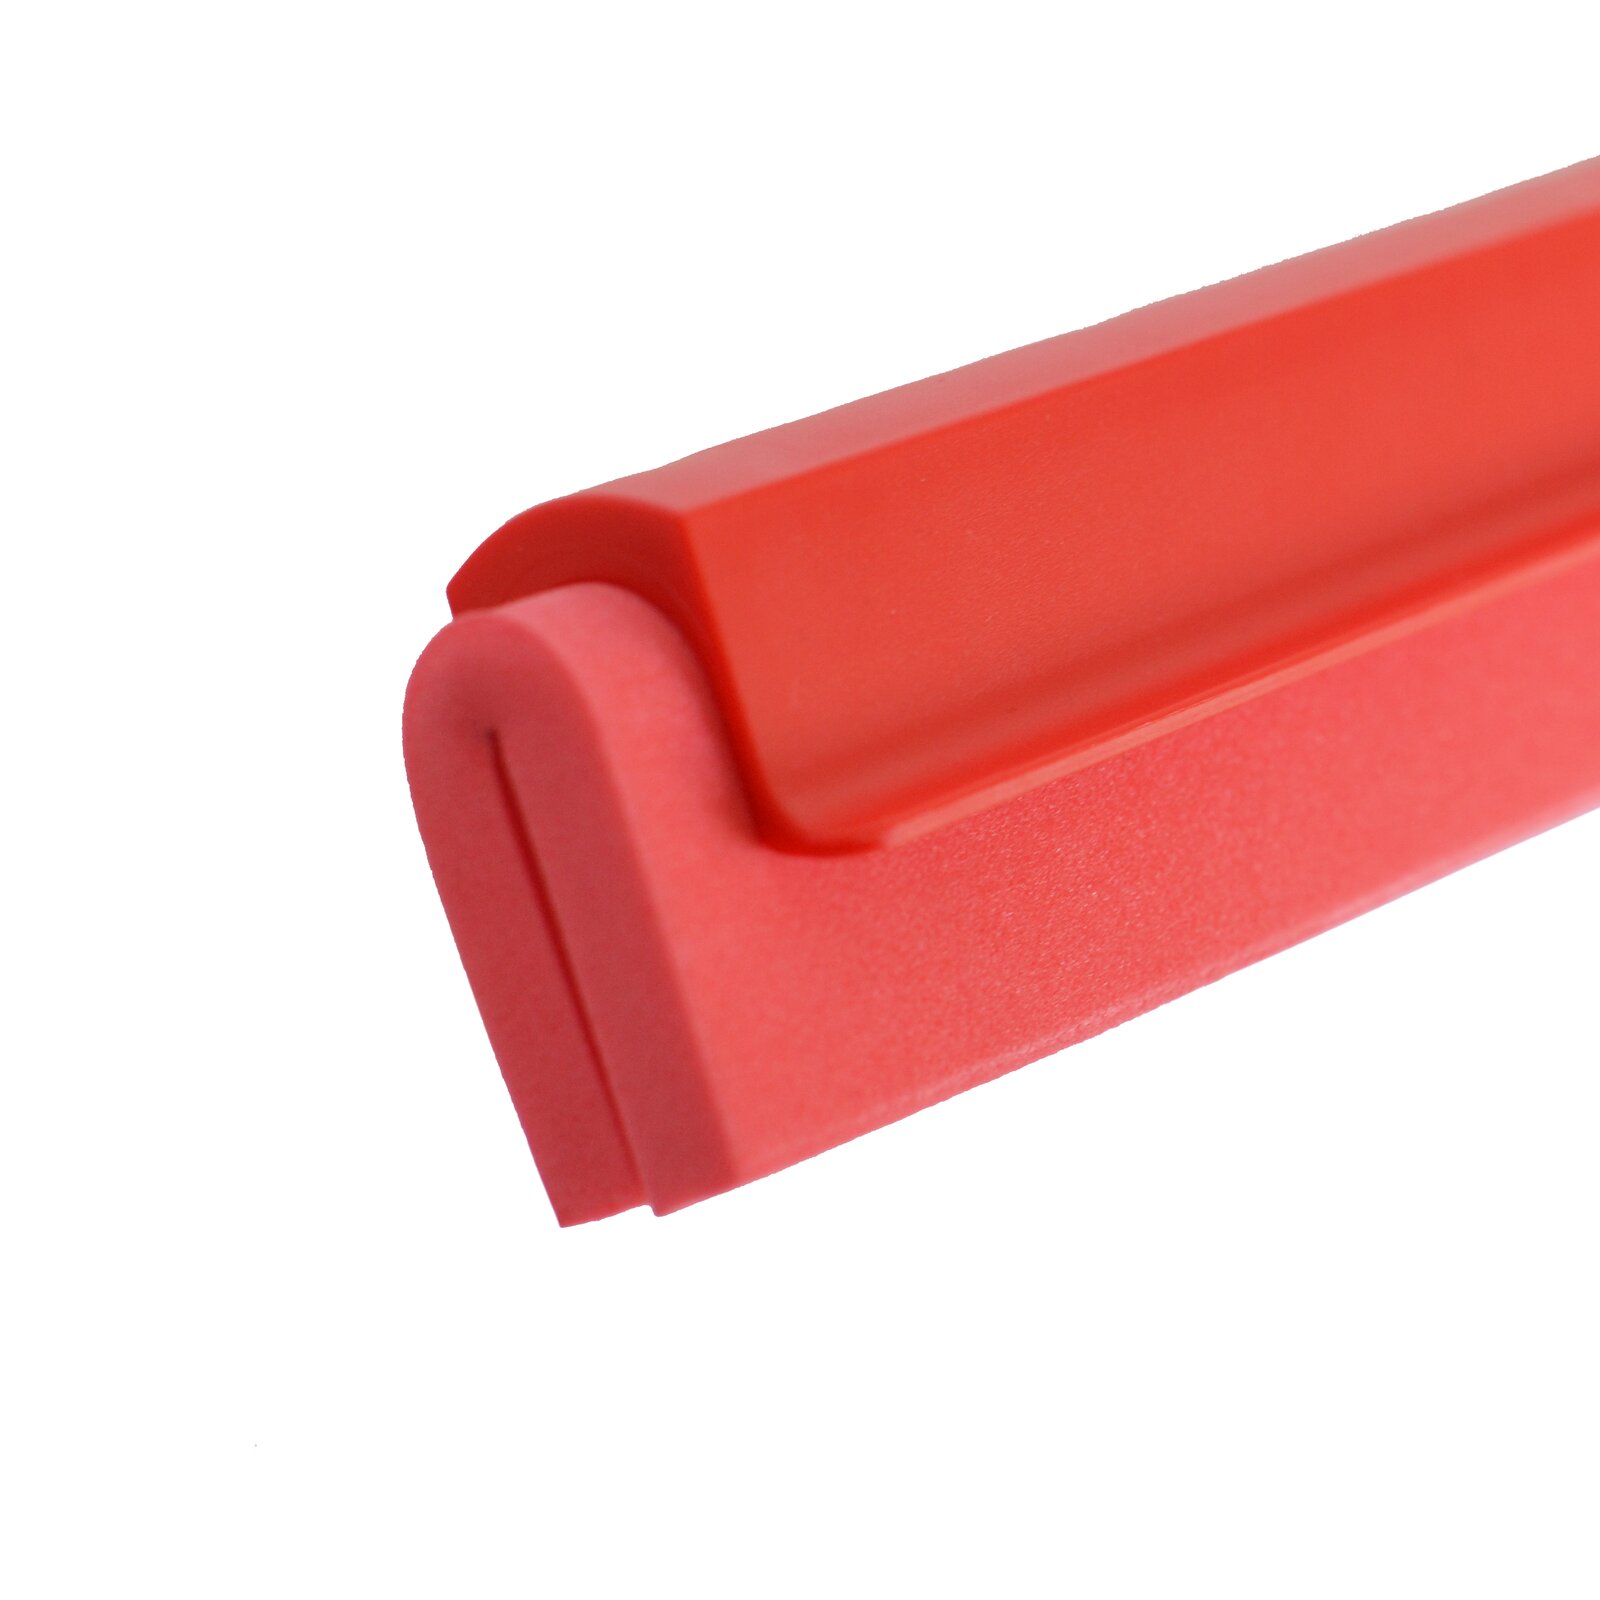 Foam blade commercial floor squeegee - 24'' with female thread